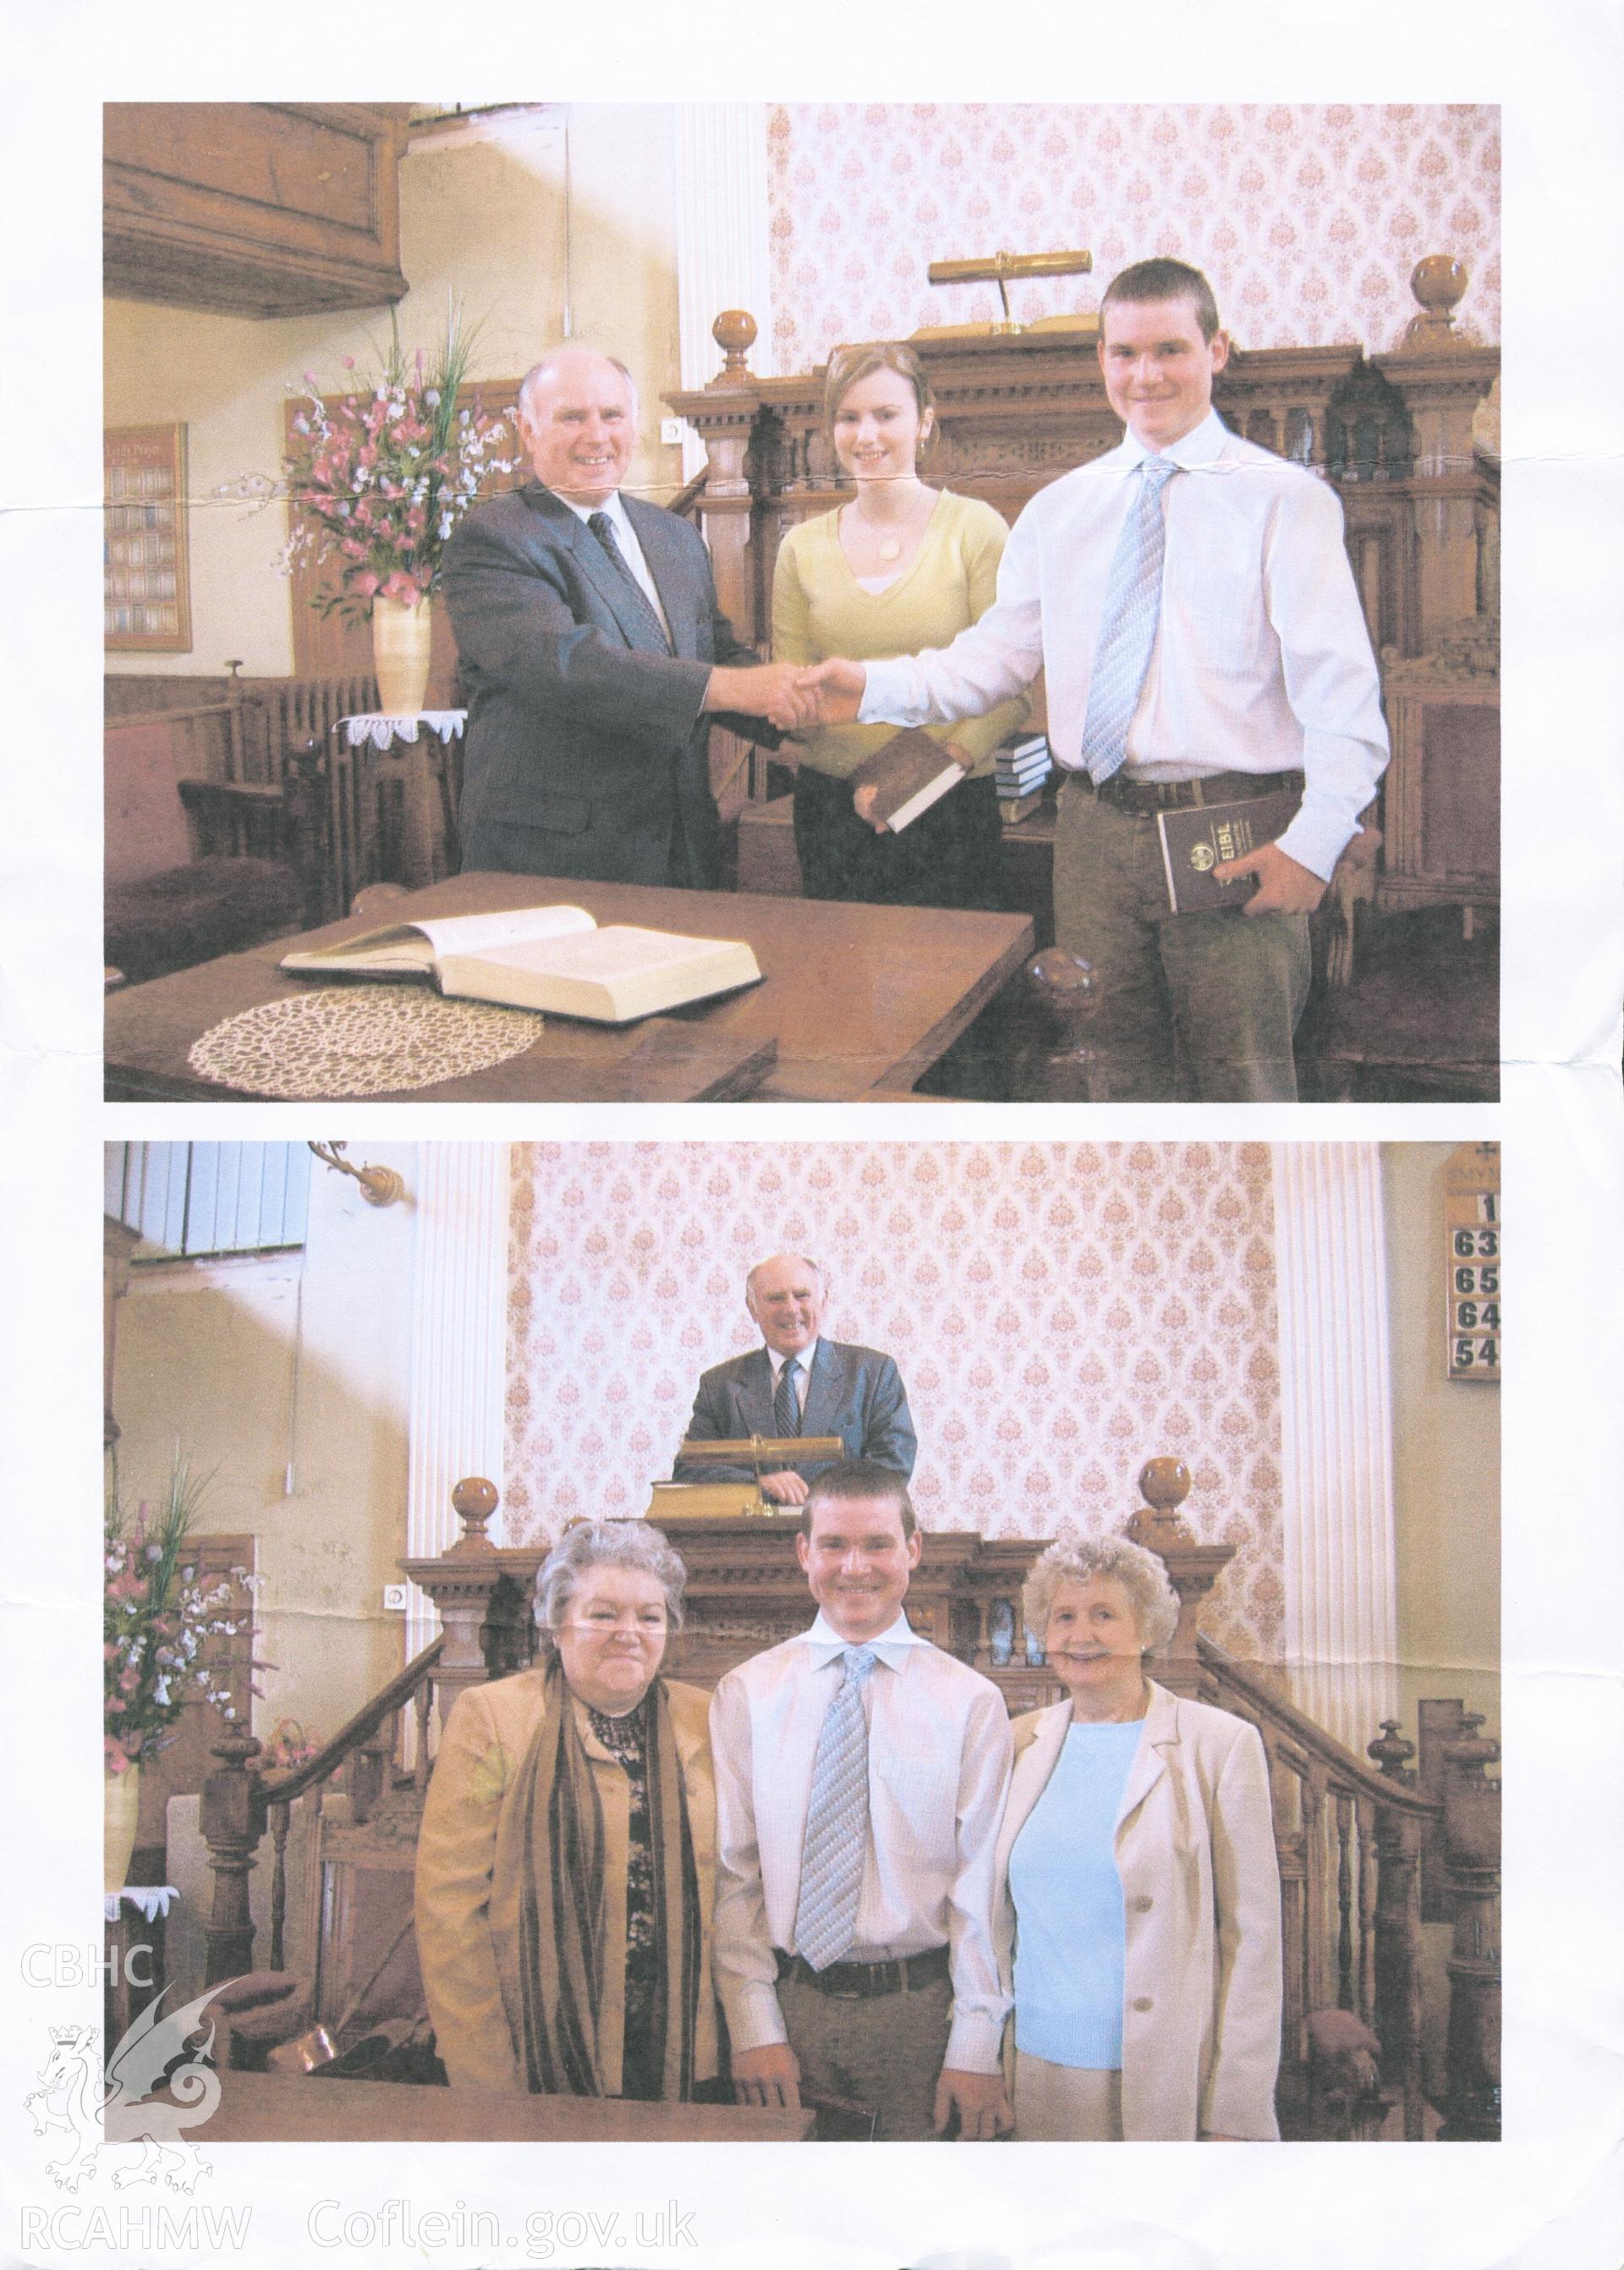 Colour photograph of Kerri Shore and Owain Davies being presented with a bible by Minister Gareth Edwards during ceremony to mark becoming full members of the chapel c.2011. Donated as part of the Digital Dissent Project.